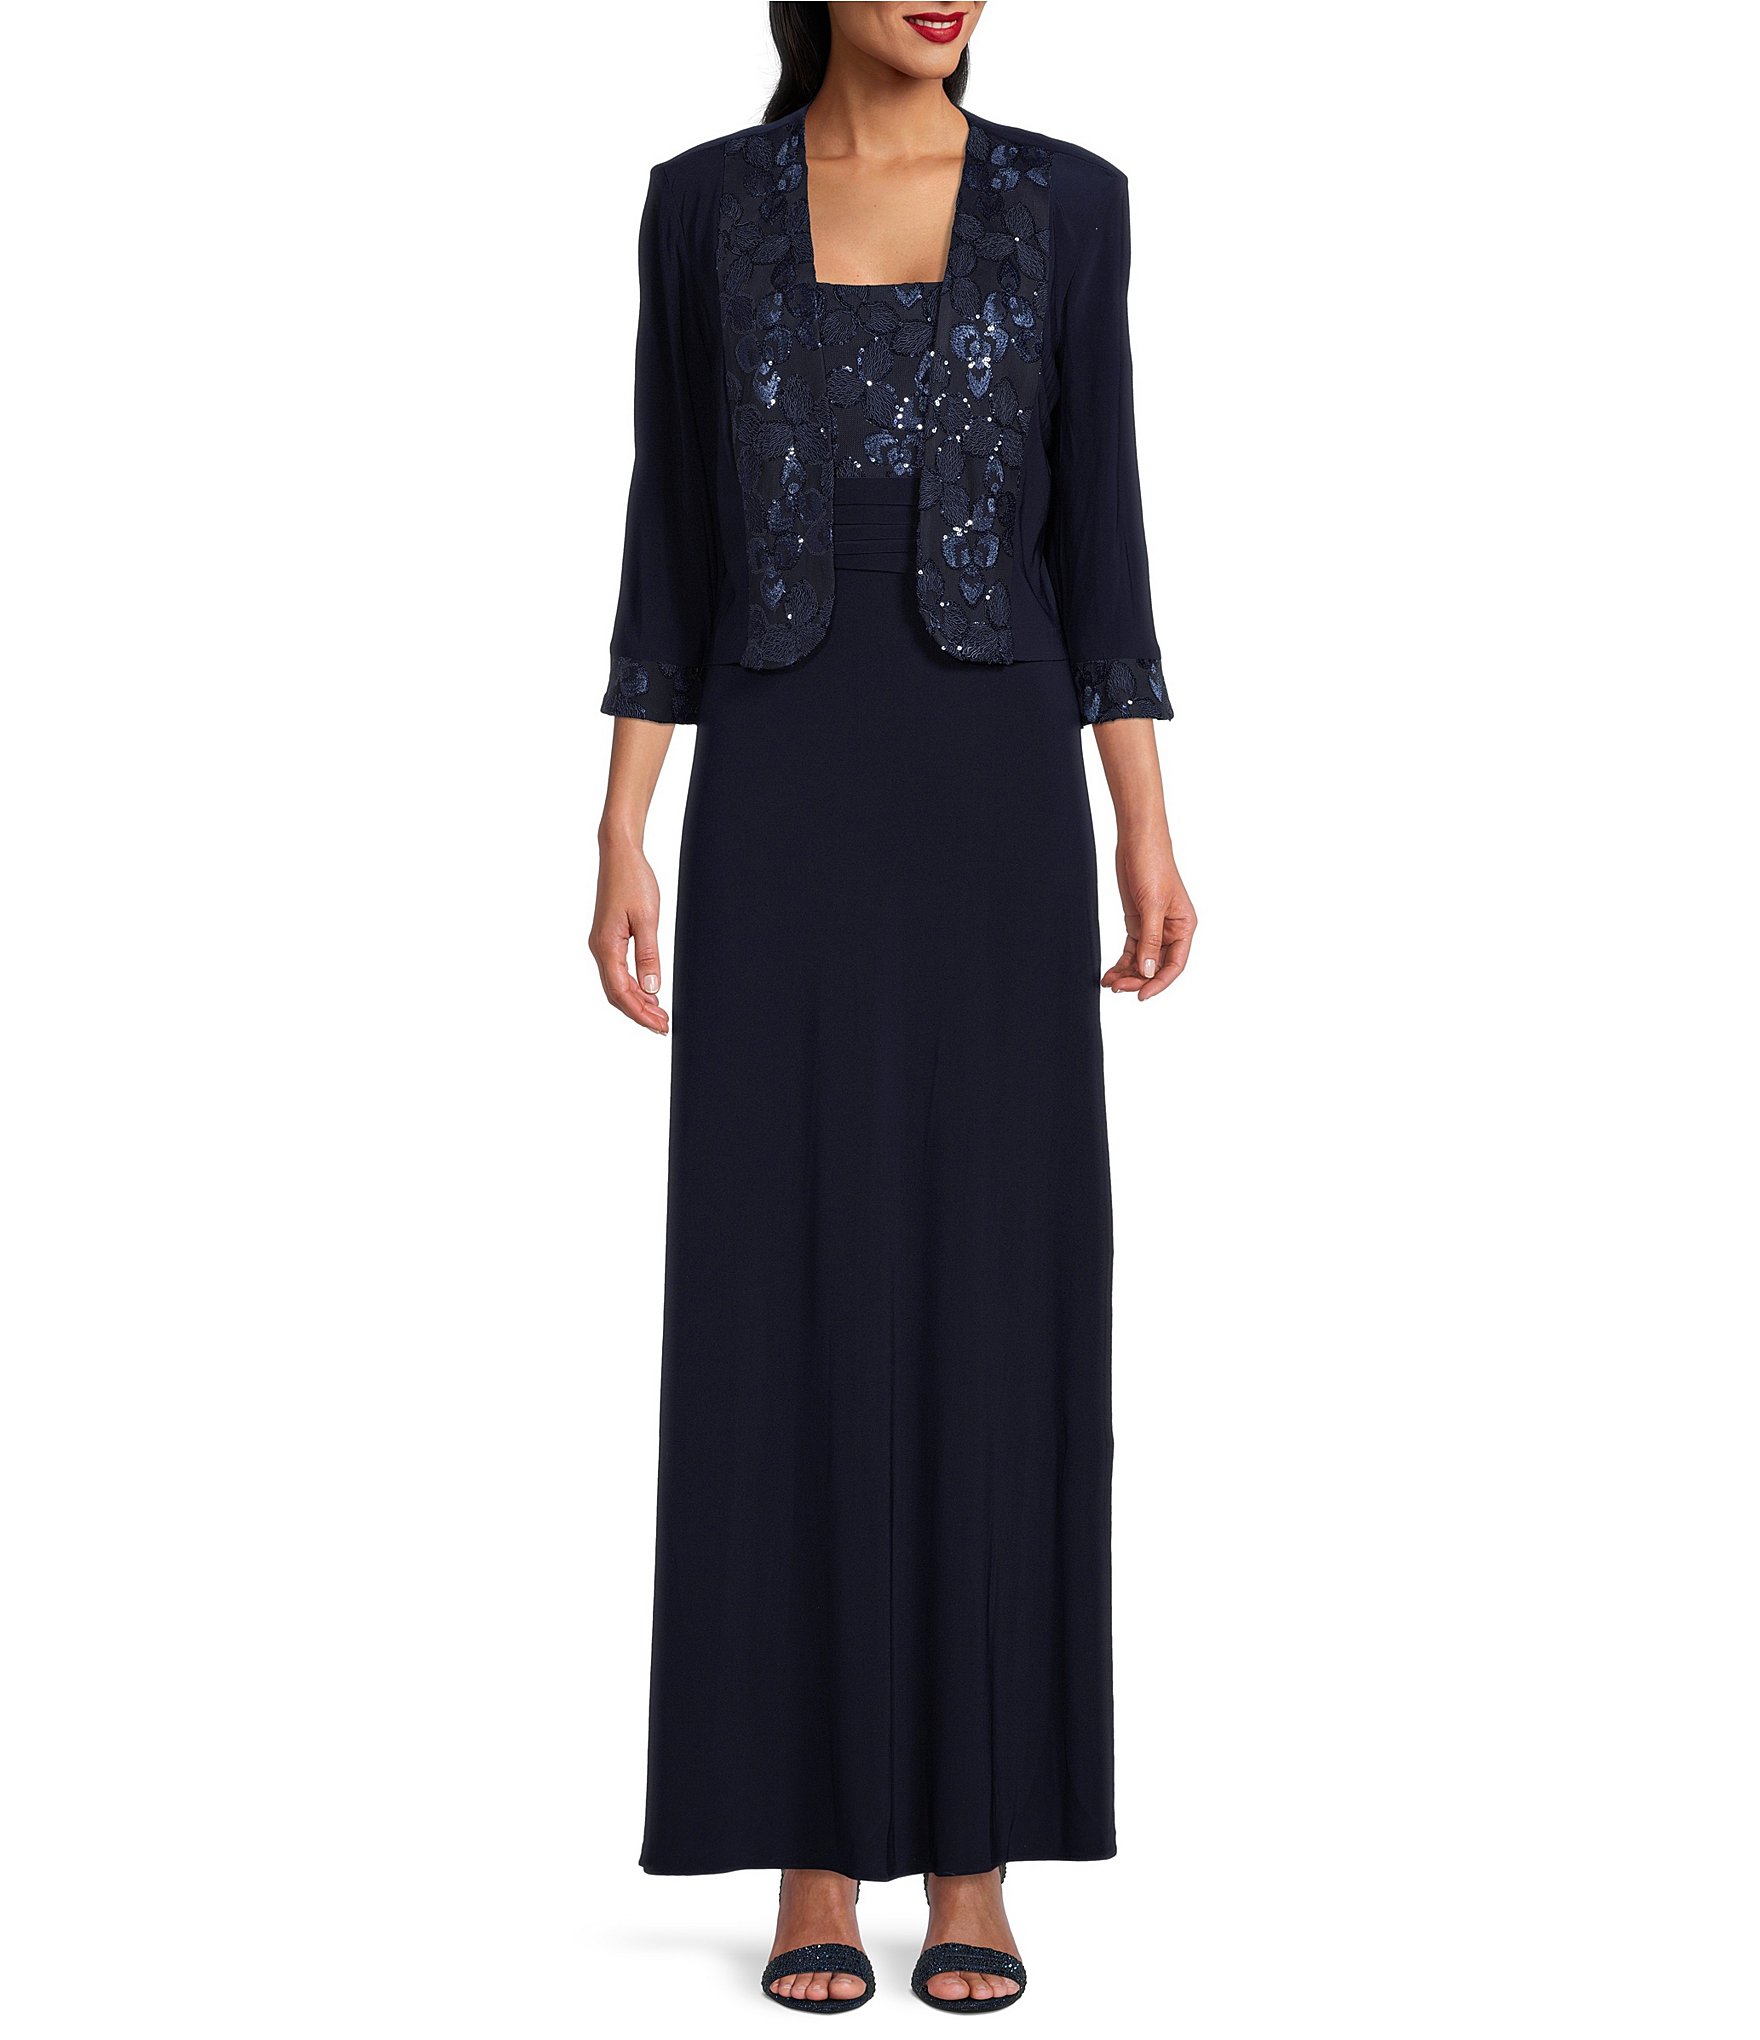 Le Bos Embroidered 3/4 Sleeve Square Neck 2-Piece Jacket Dress | Dillard's